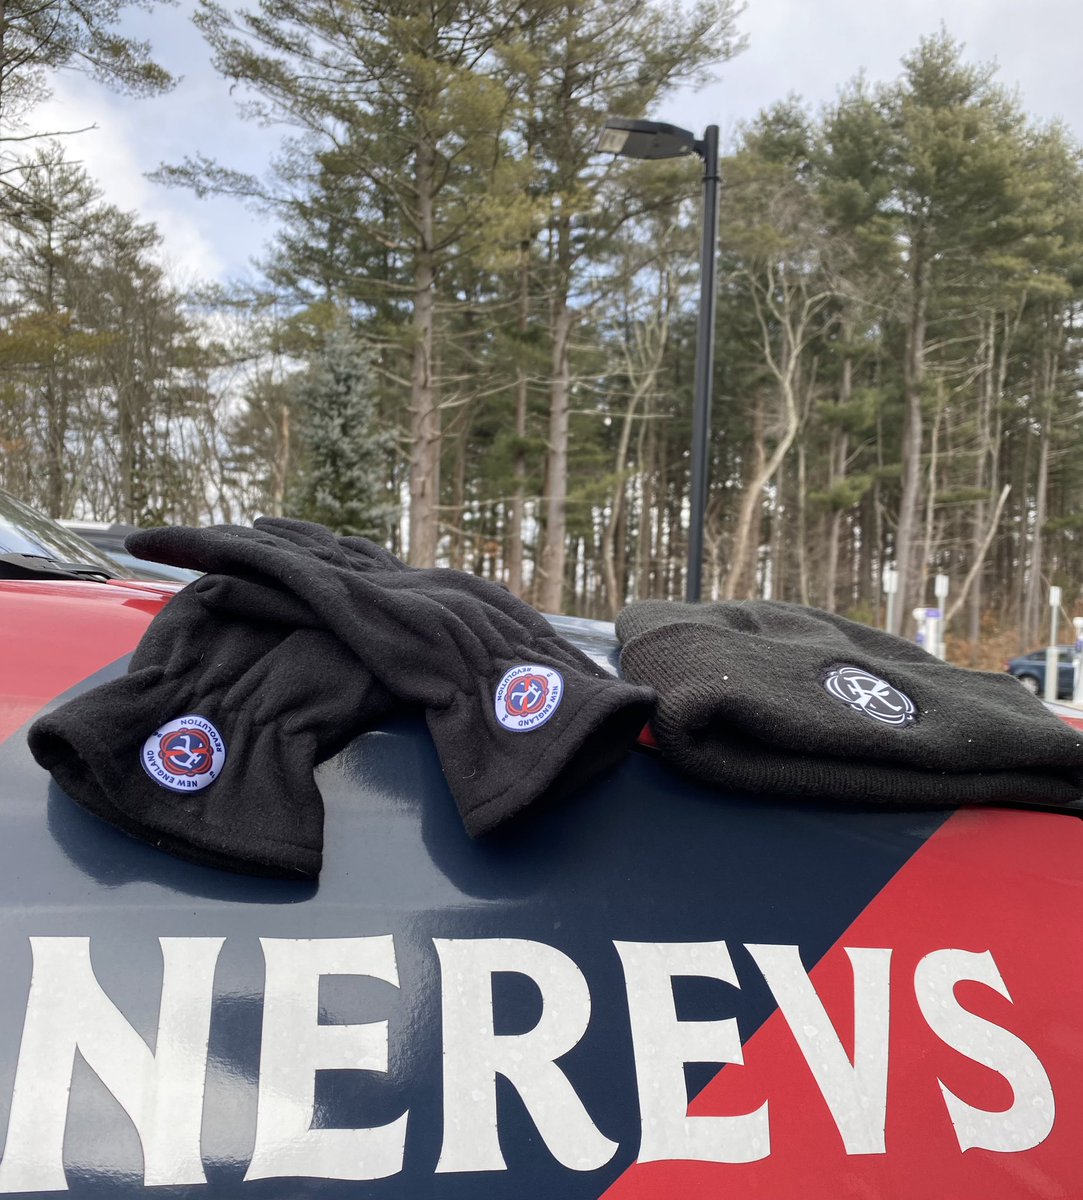 Support the Revs and stay warm at the same time! #nerevs Like and repost for your chance to at a 🧼 beanie and some 🔥 custom gloves. We’ll pick 5 eligible winners! *must be following to win*